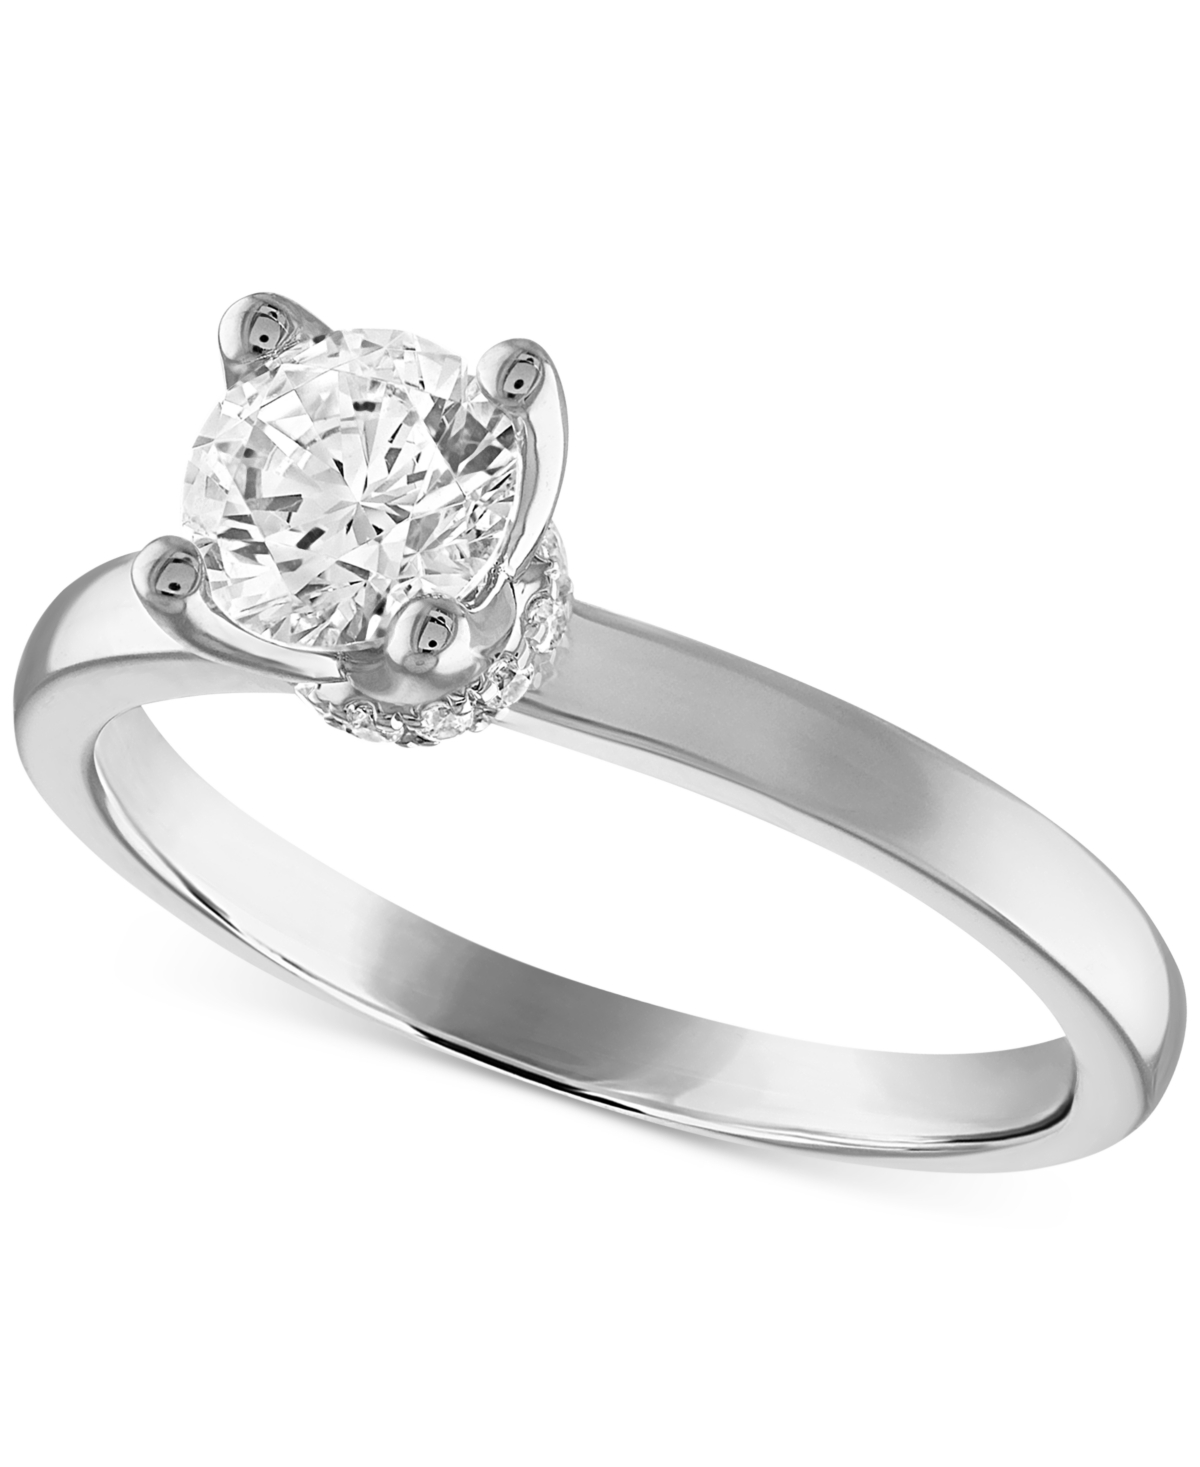 Certified Diamond Solitaire Engagement Ring (3/4 ct. t.w.) in 14k Gold featuring diamonds with the De Beers Code of Origin, Created for Macy's